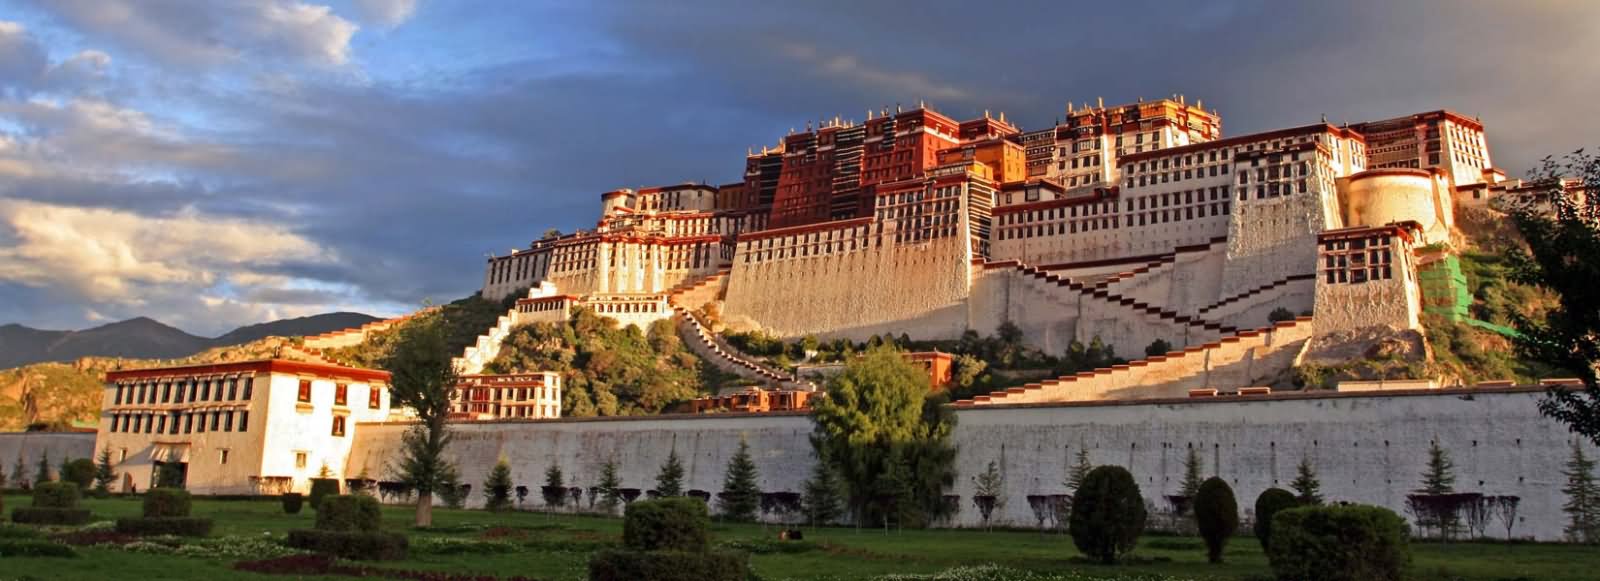 The Potala Palace During Sunset Picture